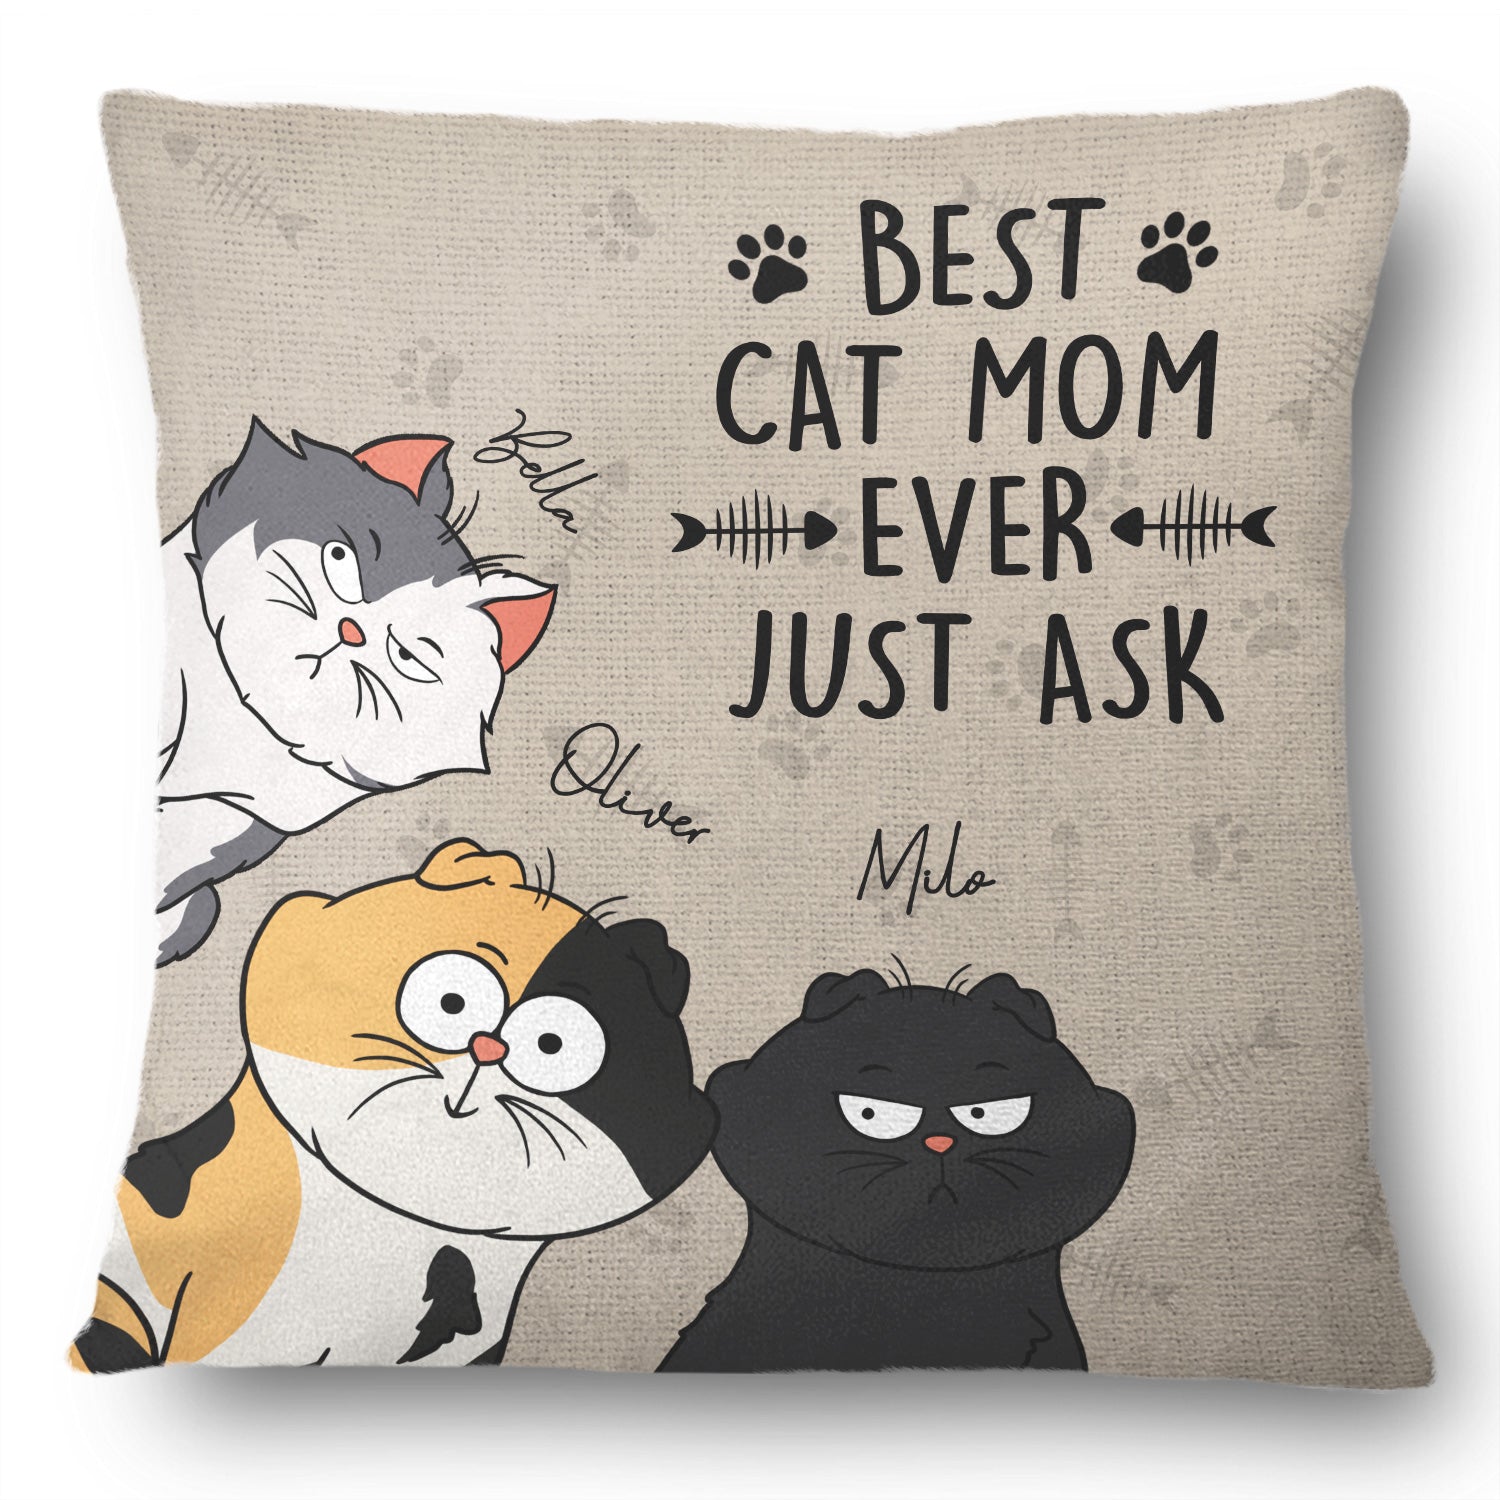 Best Cat Dad Mom Ever Just Ask - Gift For Cat Lovers - Personalized Pillow